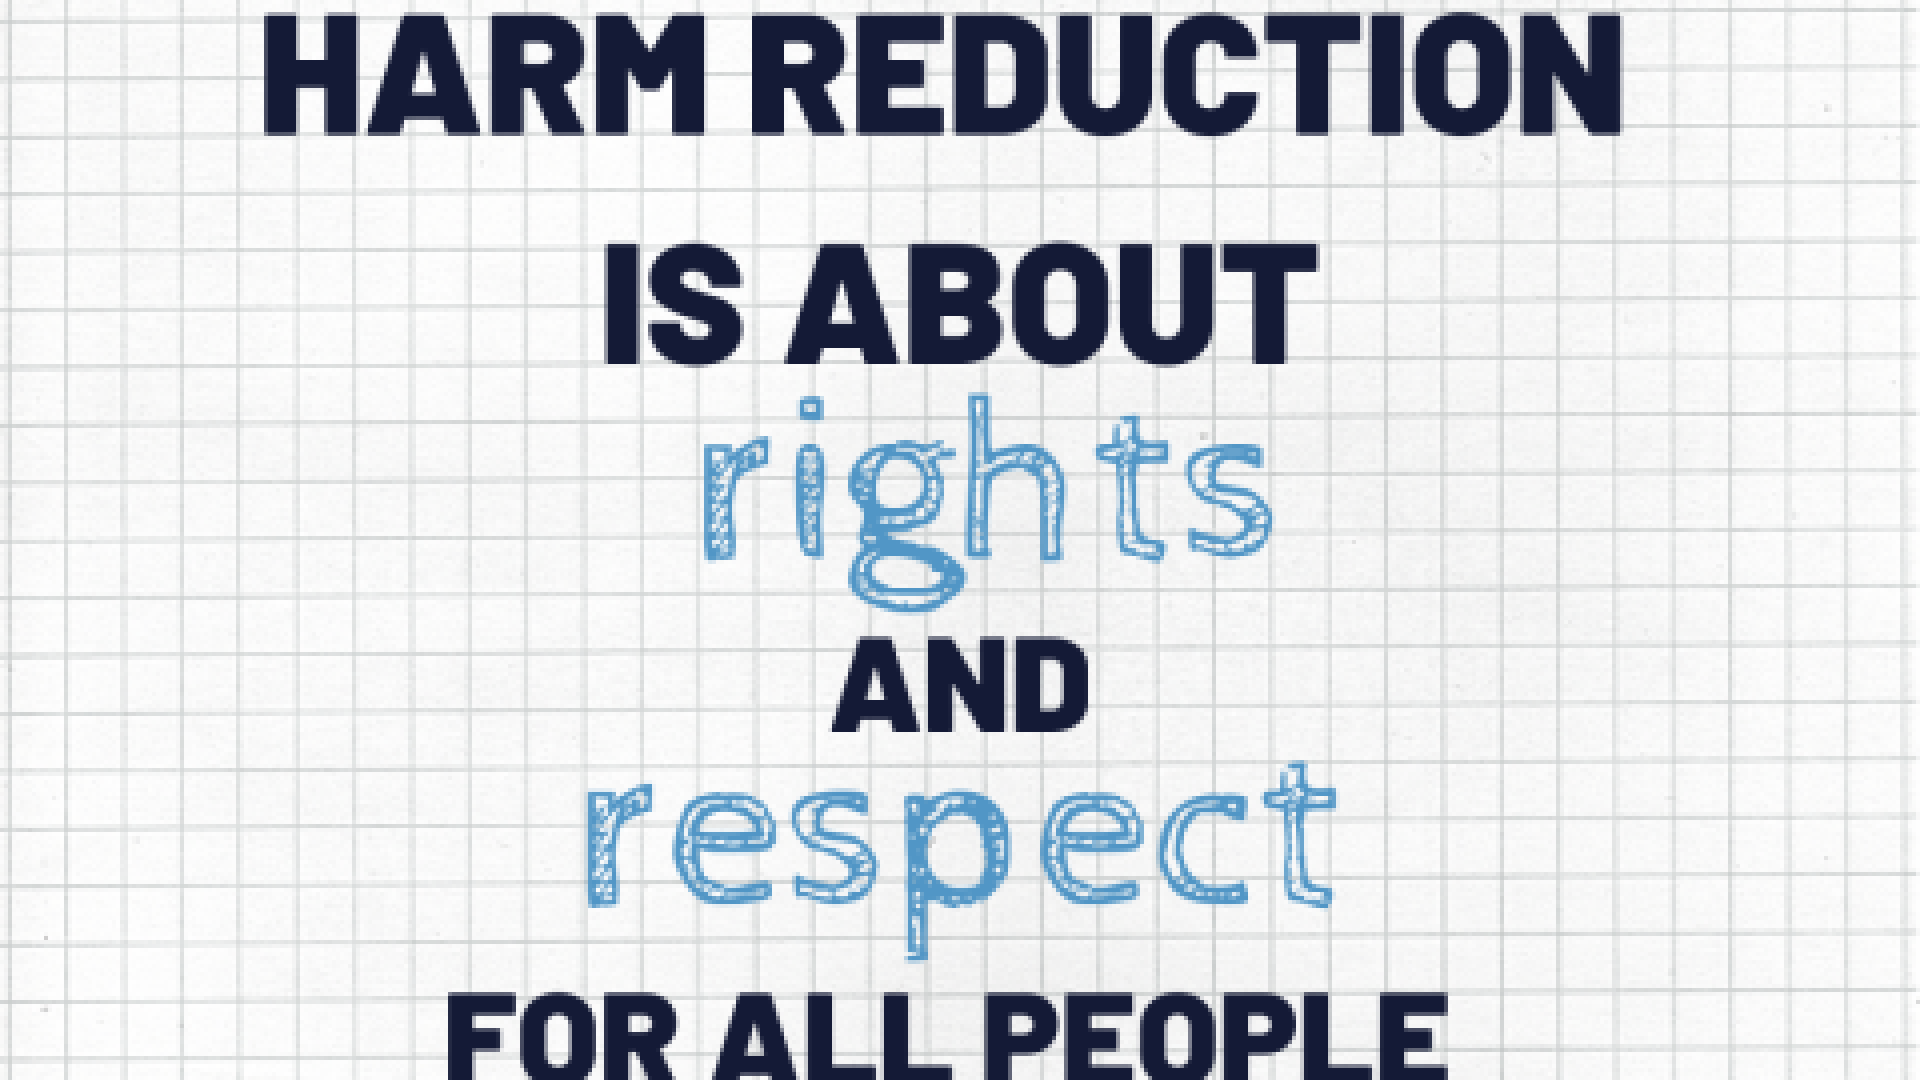 A graphic of black text on a blue and white checkered pattern reads "Harm Reduction is about rights and respect for all people."